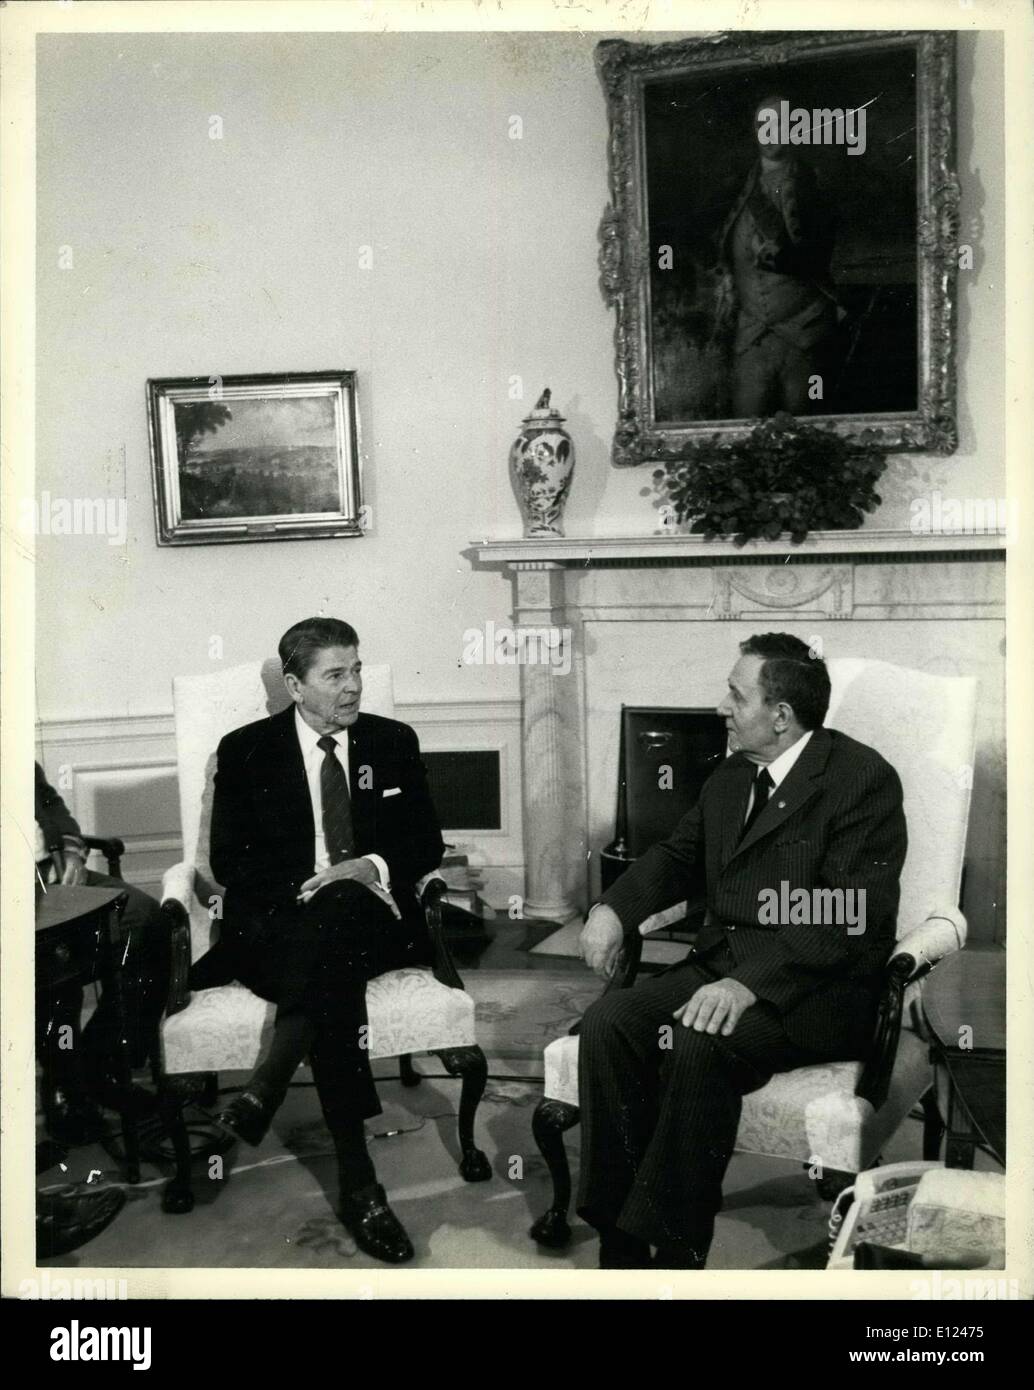 Sep. 28, 1984 - Oval Office Meeting Washington, D.C.: President Ronald Reagan is shown with Soviet Foreign Minister Andrei Gromyko in the Oval Office of the White House as they posed for pictures prior to getting down to serious talks. Stock Photo